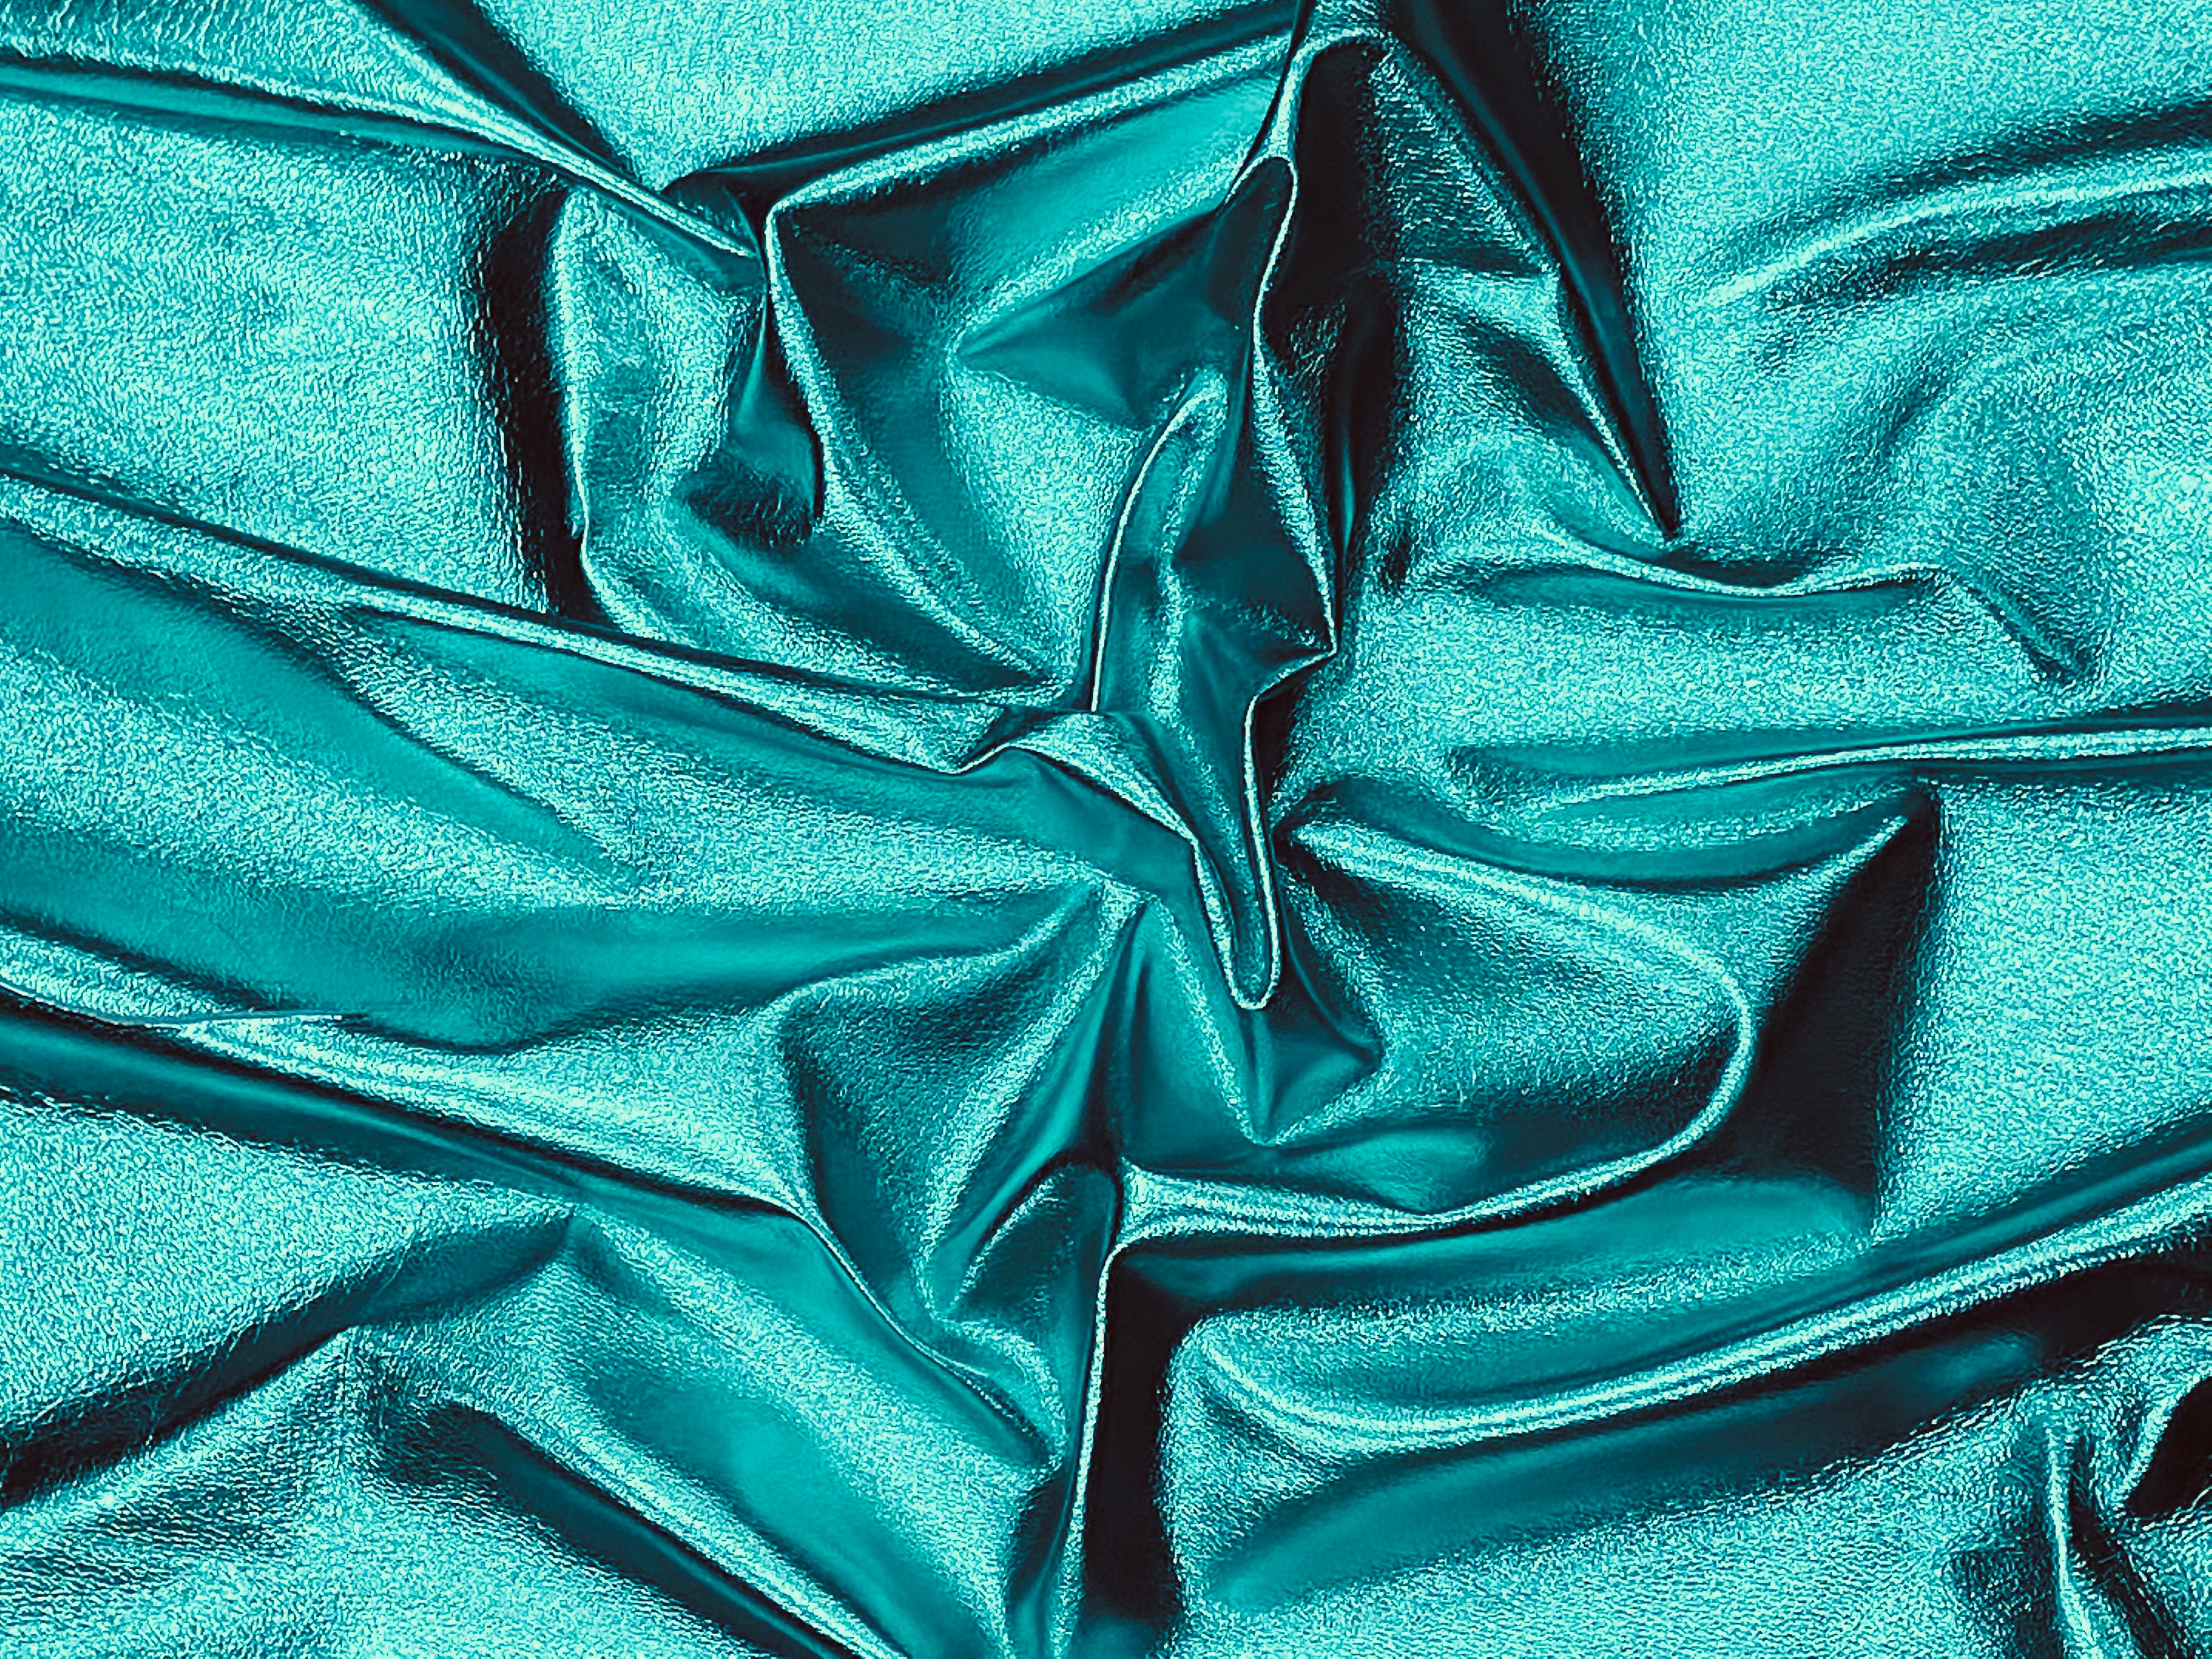 Turquoise, Metallic Foiled Leather Pig Skin : (0.6-0.7mm 1.5oz) 15 – GH  LEATHERS LTD